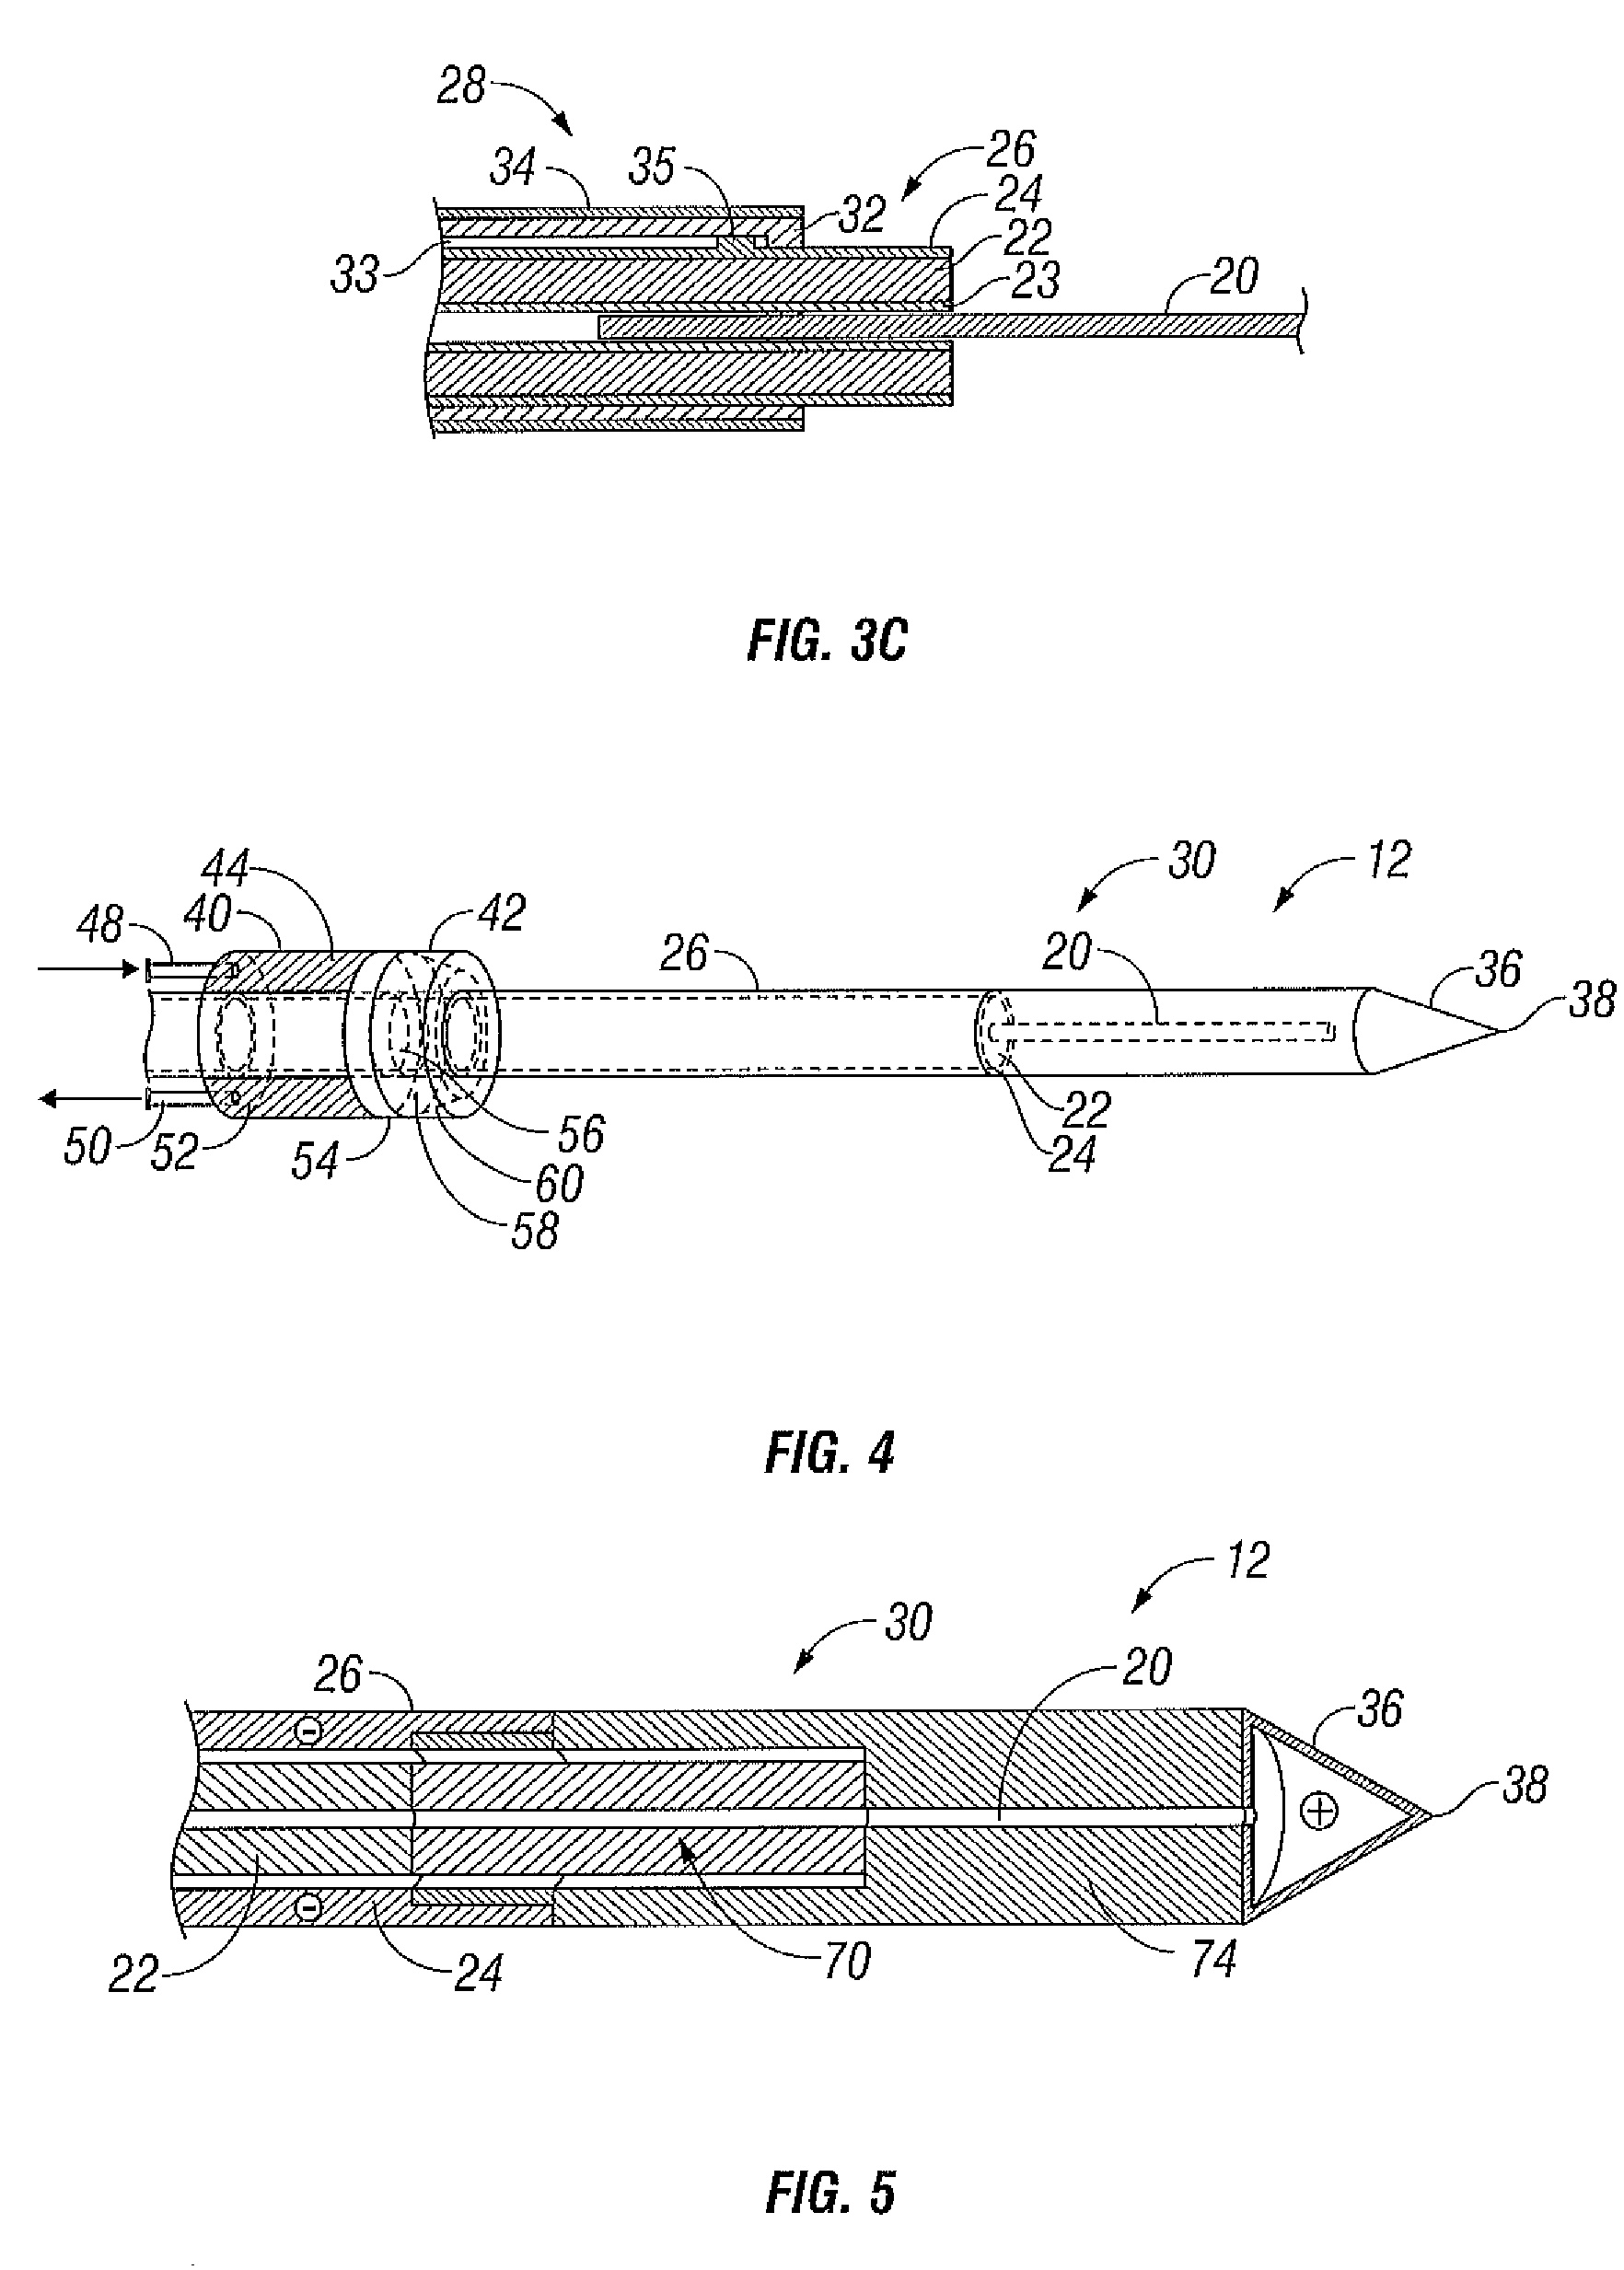 Dynamically Matched Microwave Antenna for Tissue Ablation